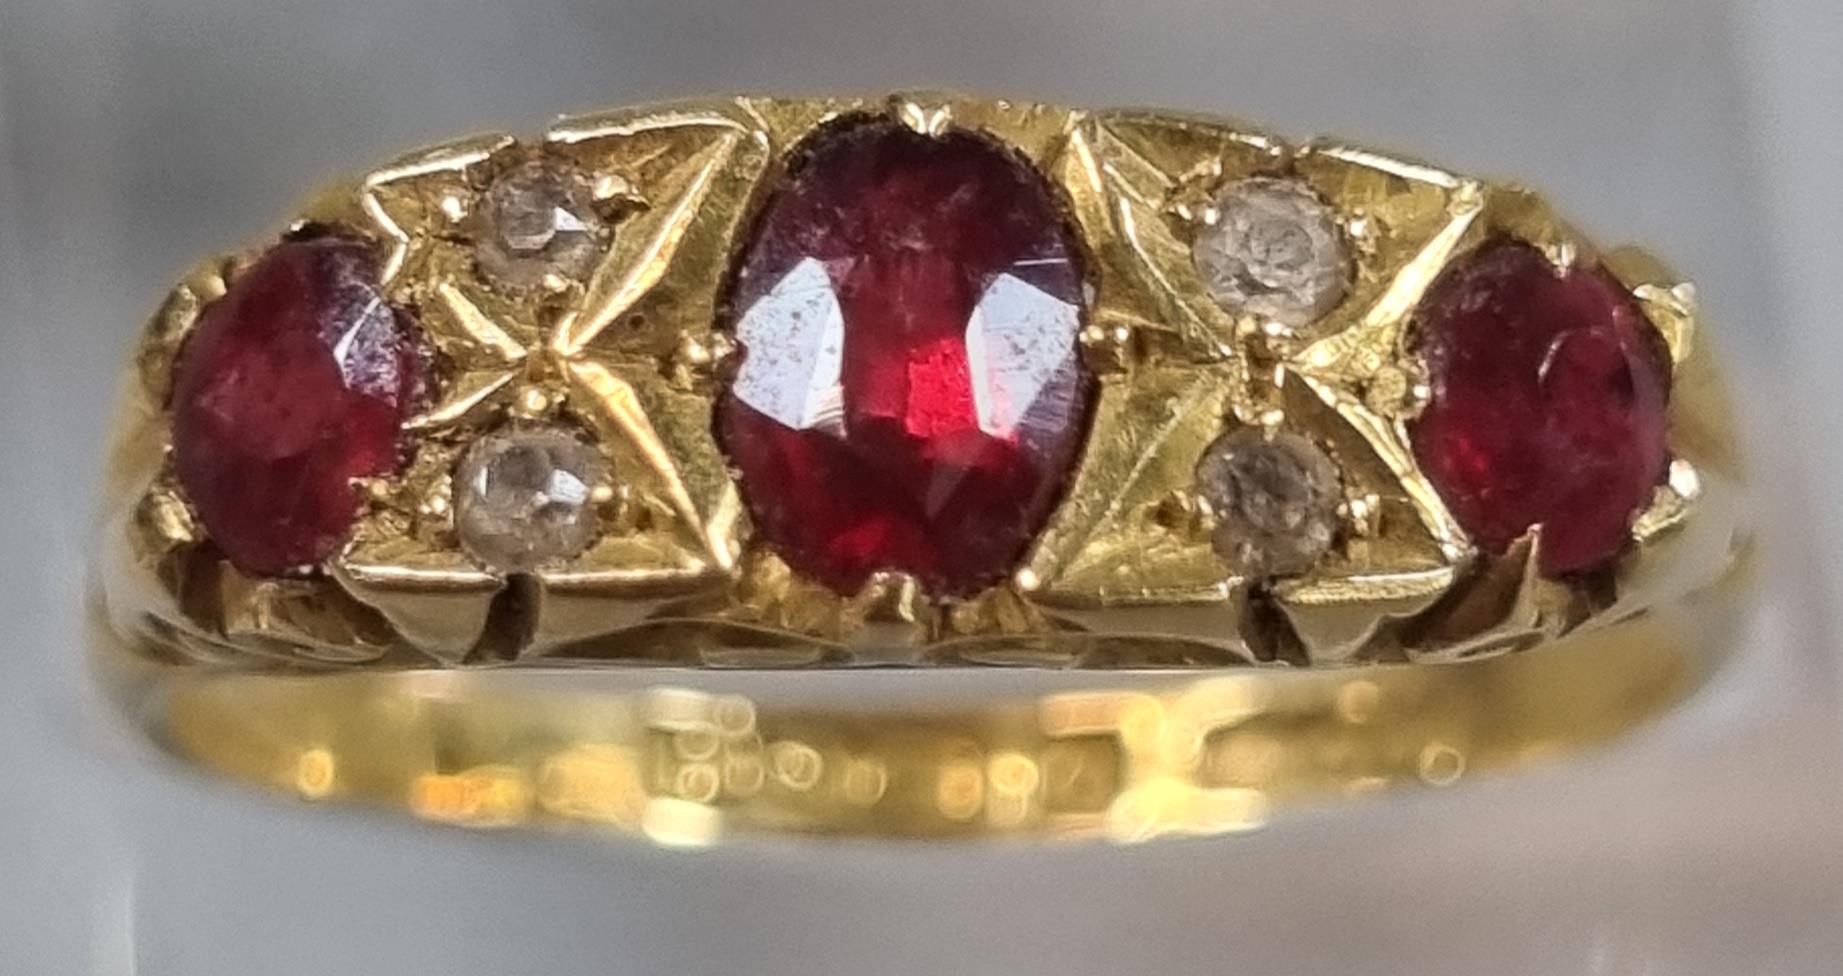 18ct gold red and white stone ring (do not test as diamonds). 3.3g approx. size Q. (B.P. 21% + VAT)